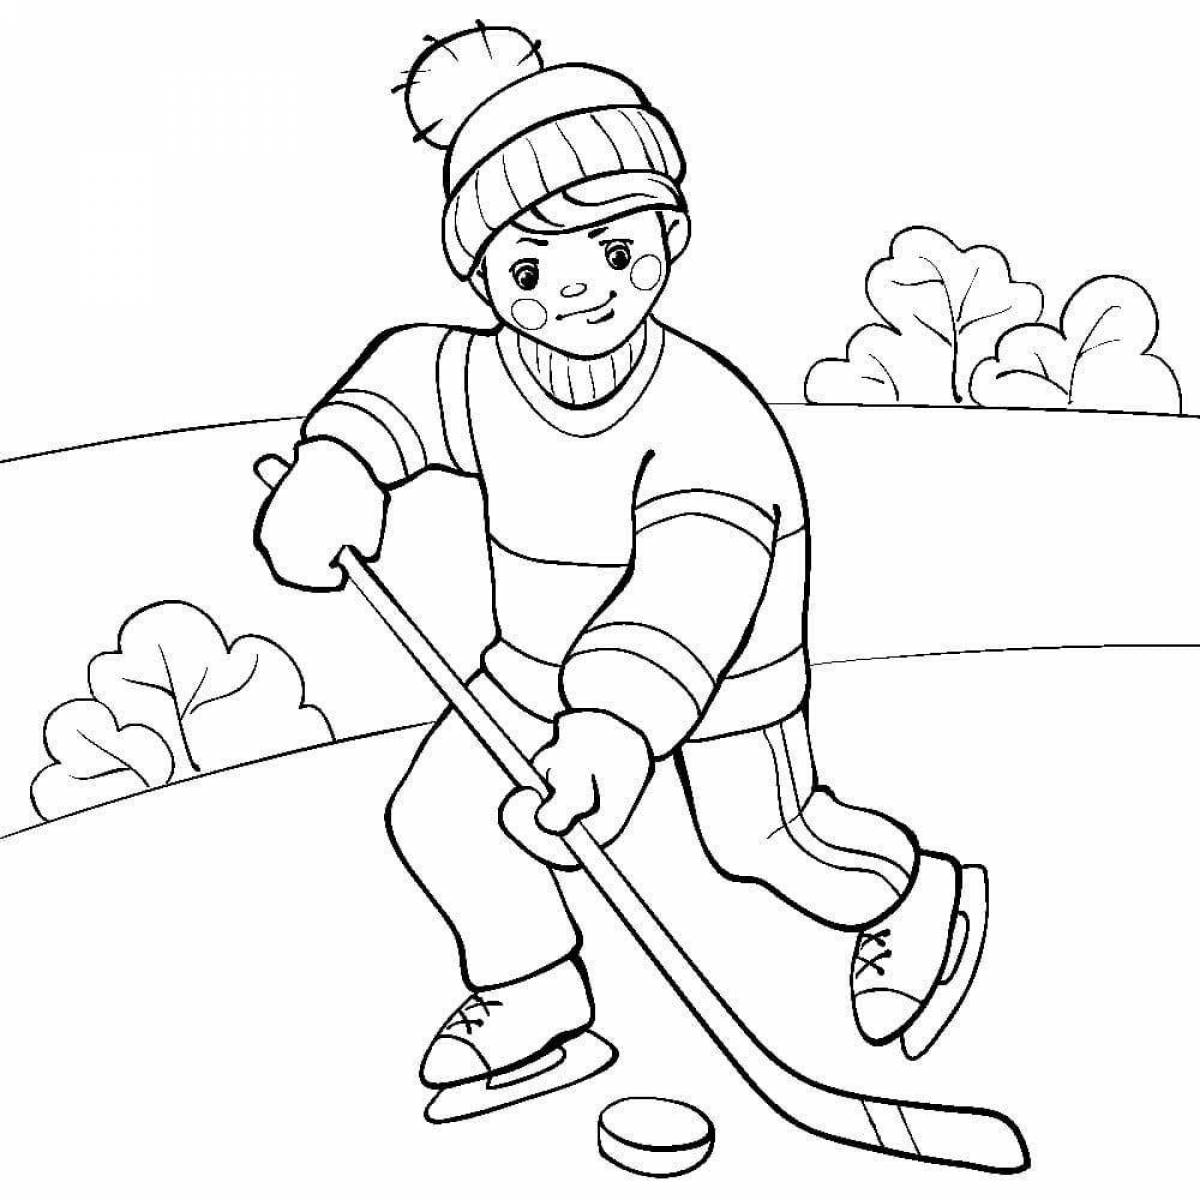 Winter sports for children 4 5 years old #2